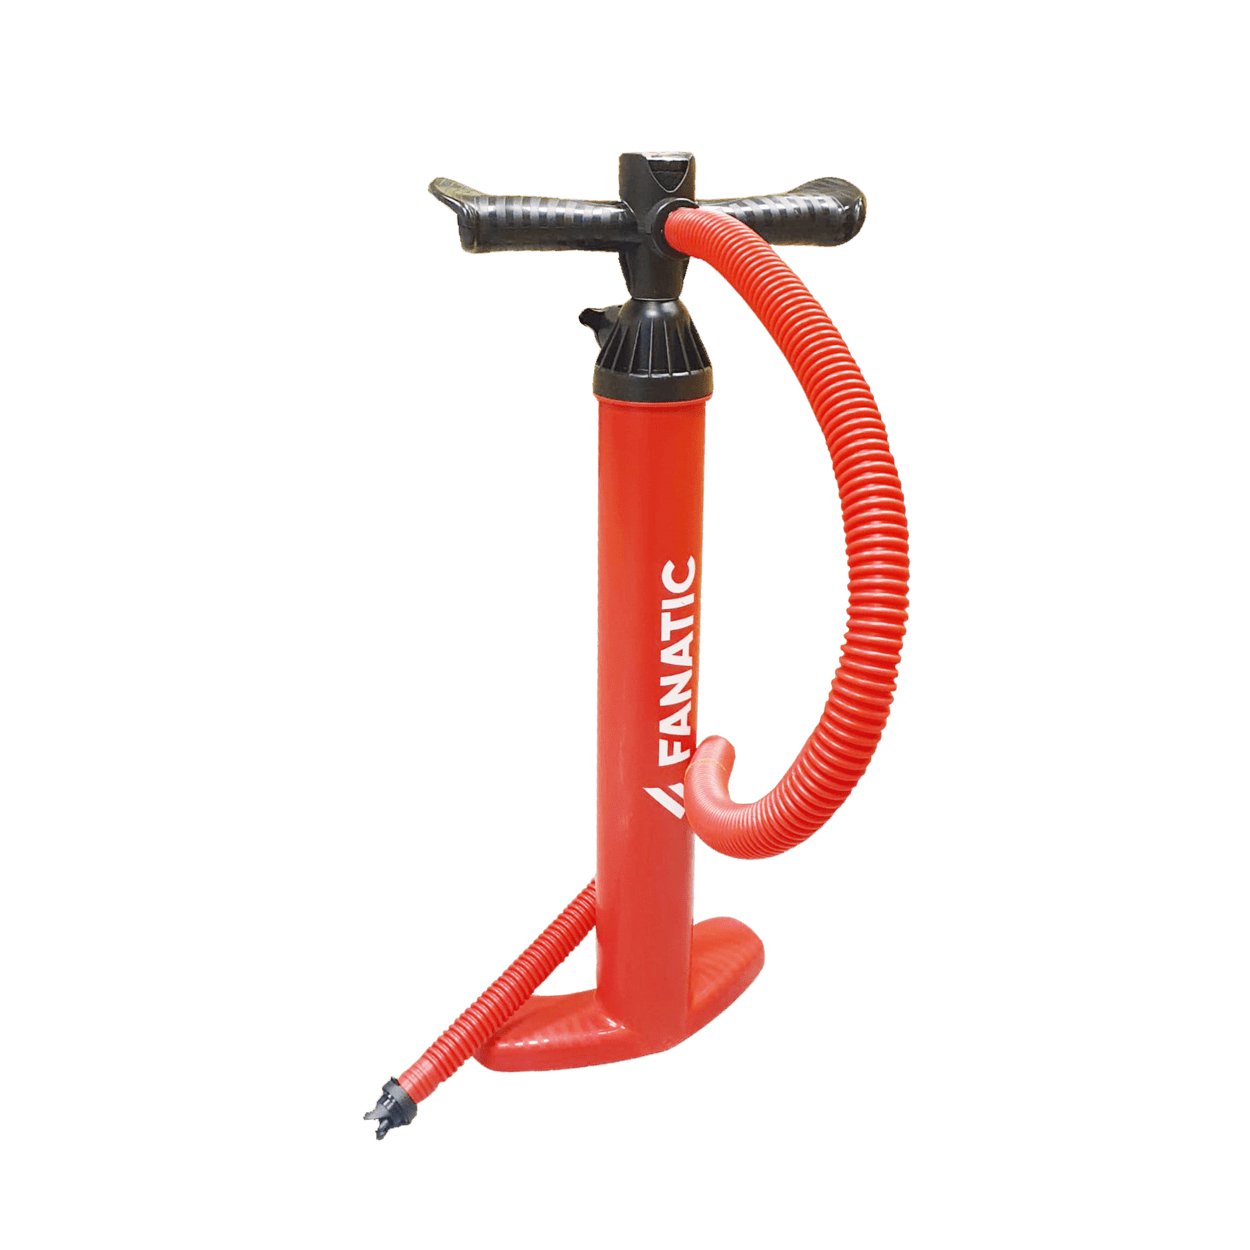 Fanatic Pump Double Action HP8 2023 - Worthing Watersports - 9008415970445 - Spareparts - Fanatic SUP